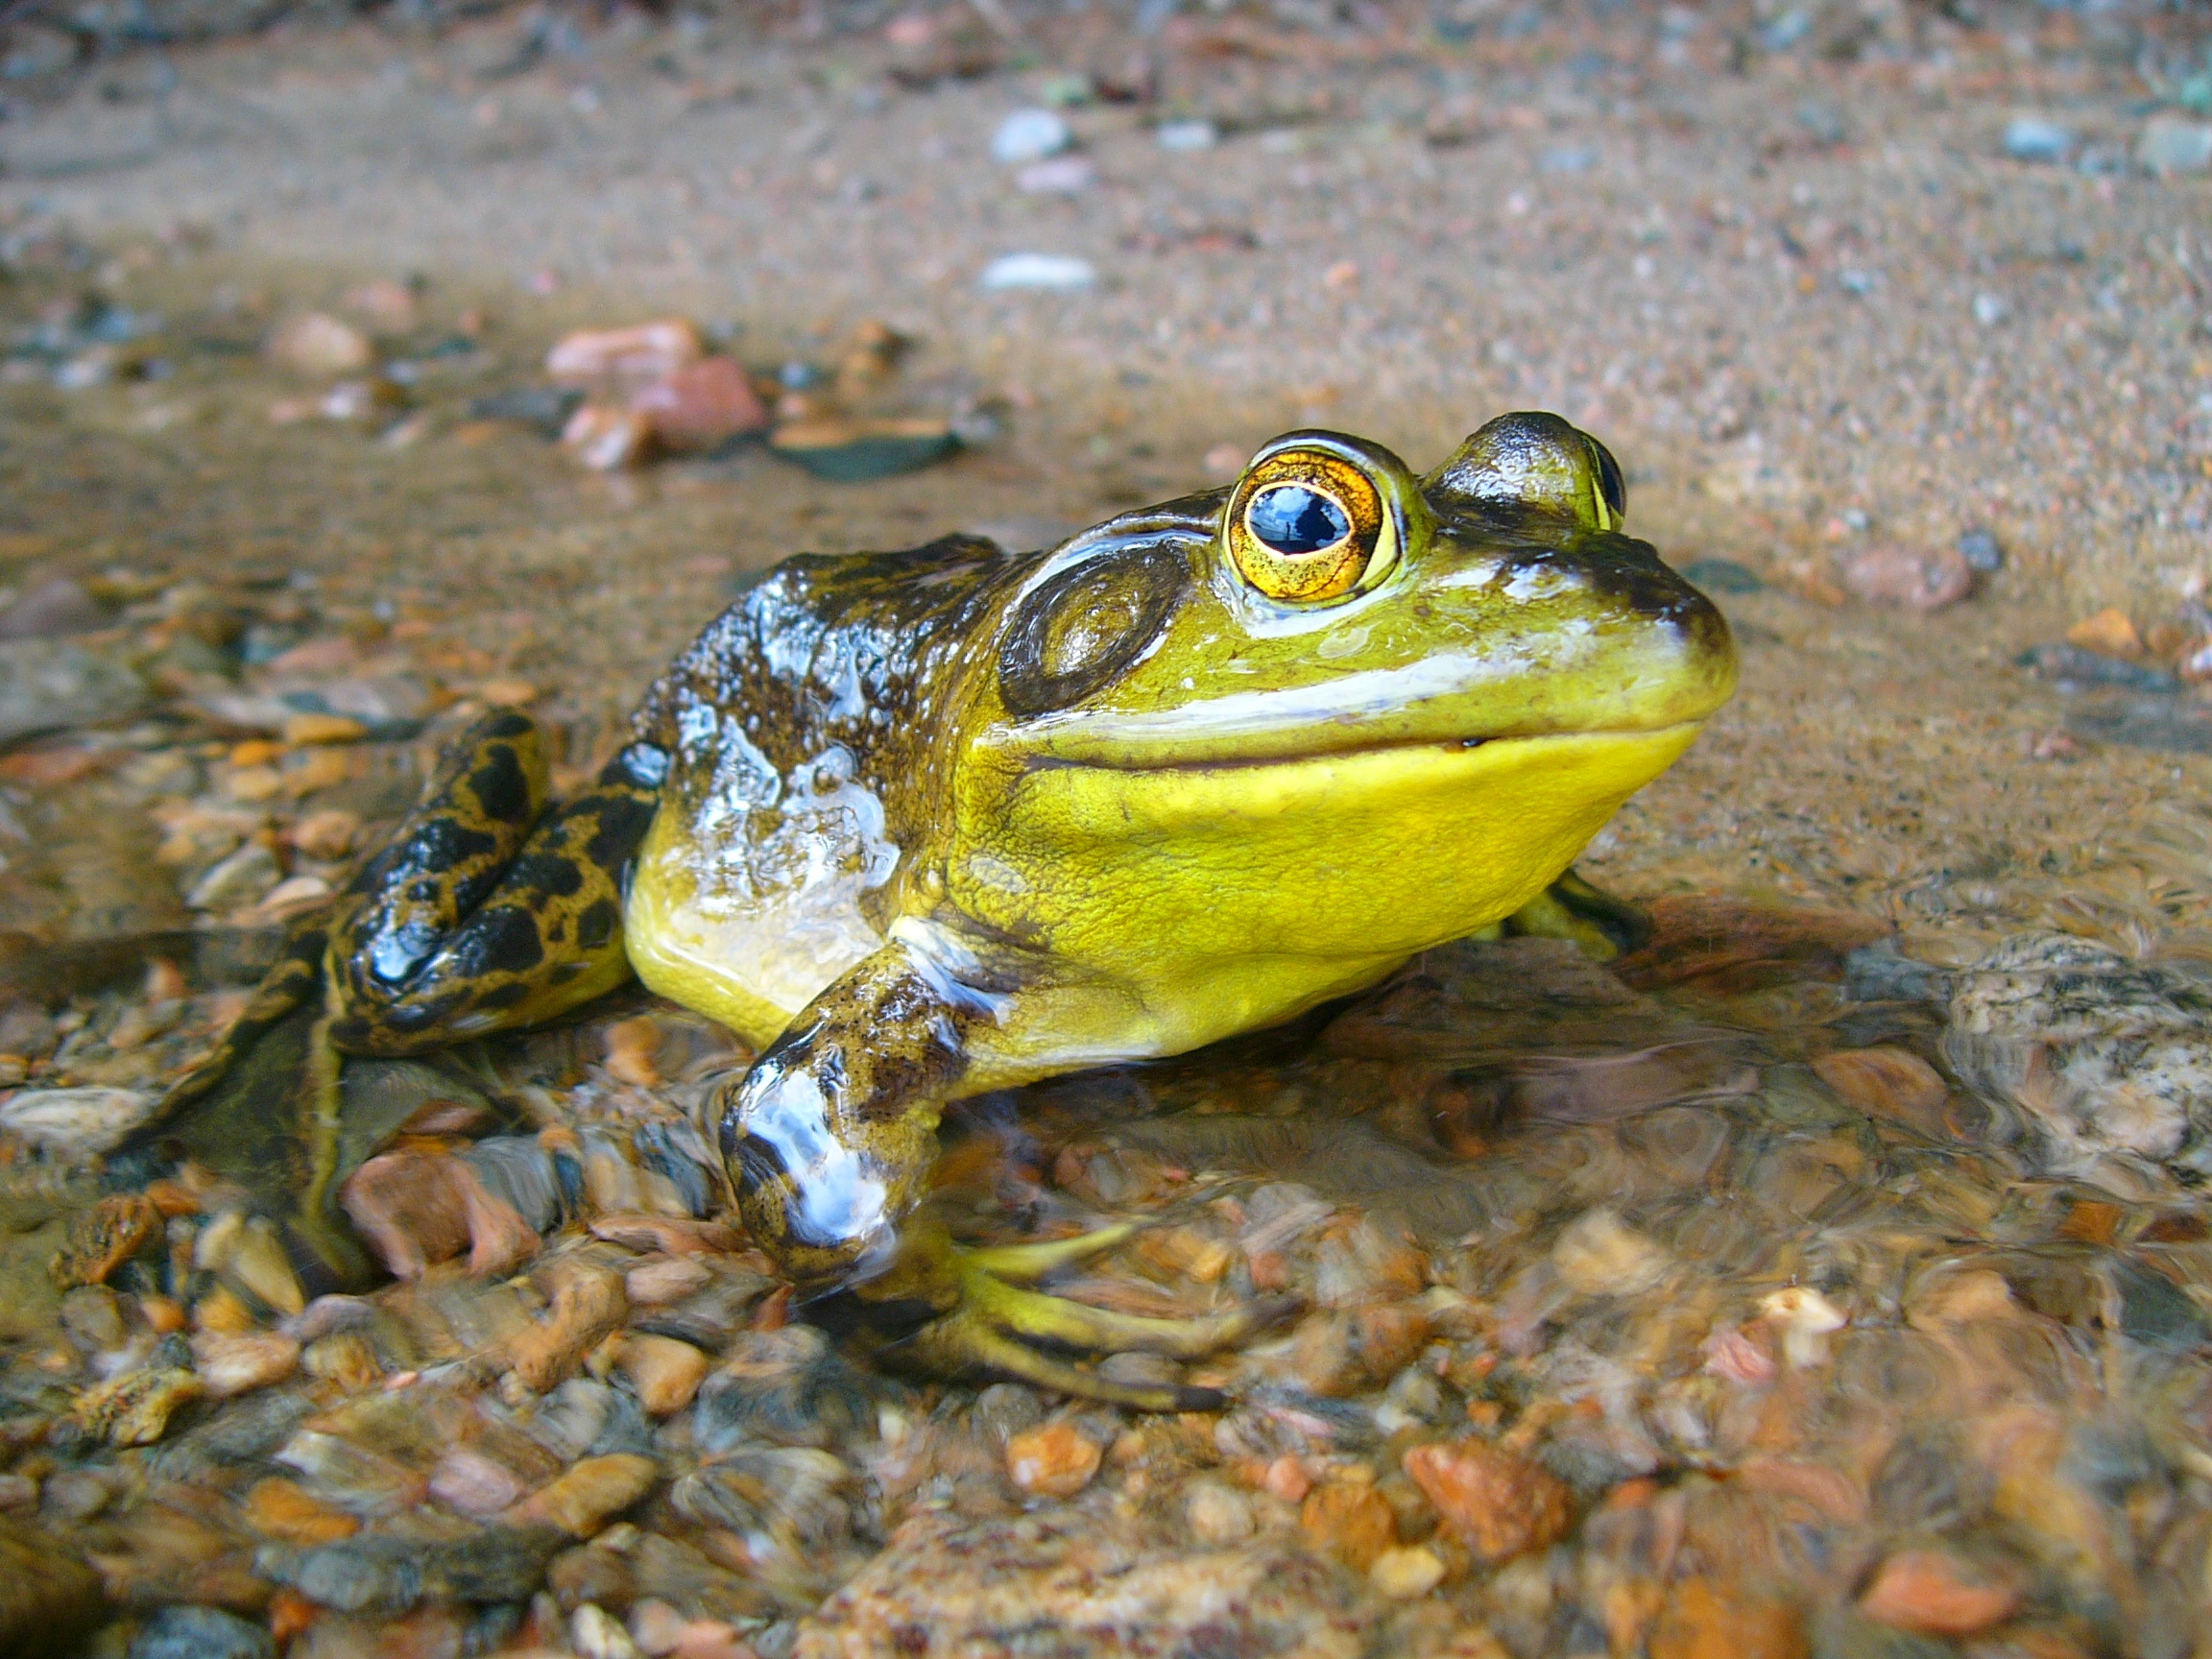 FROGS FEARED TO BE CRUELLY KEPT TURNED OUT TO BE HAVING SEX